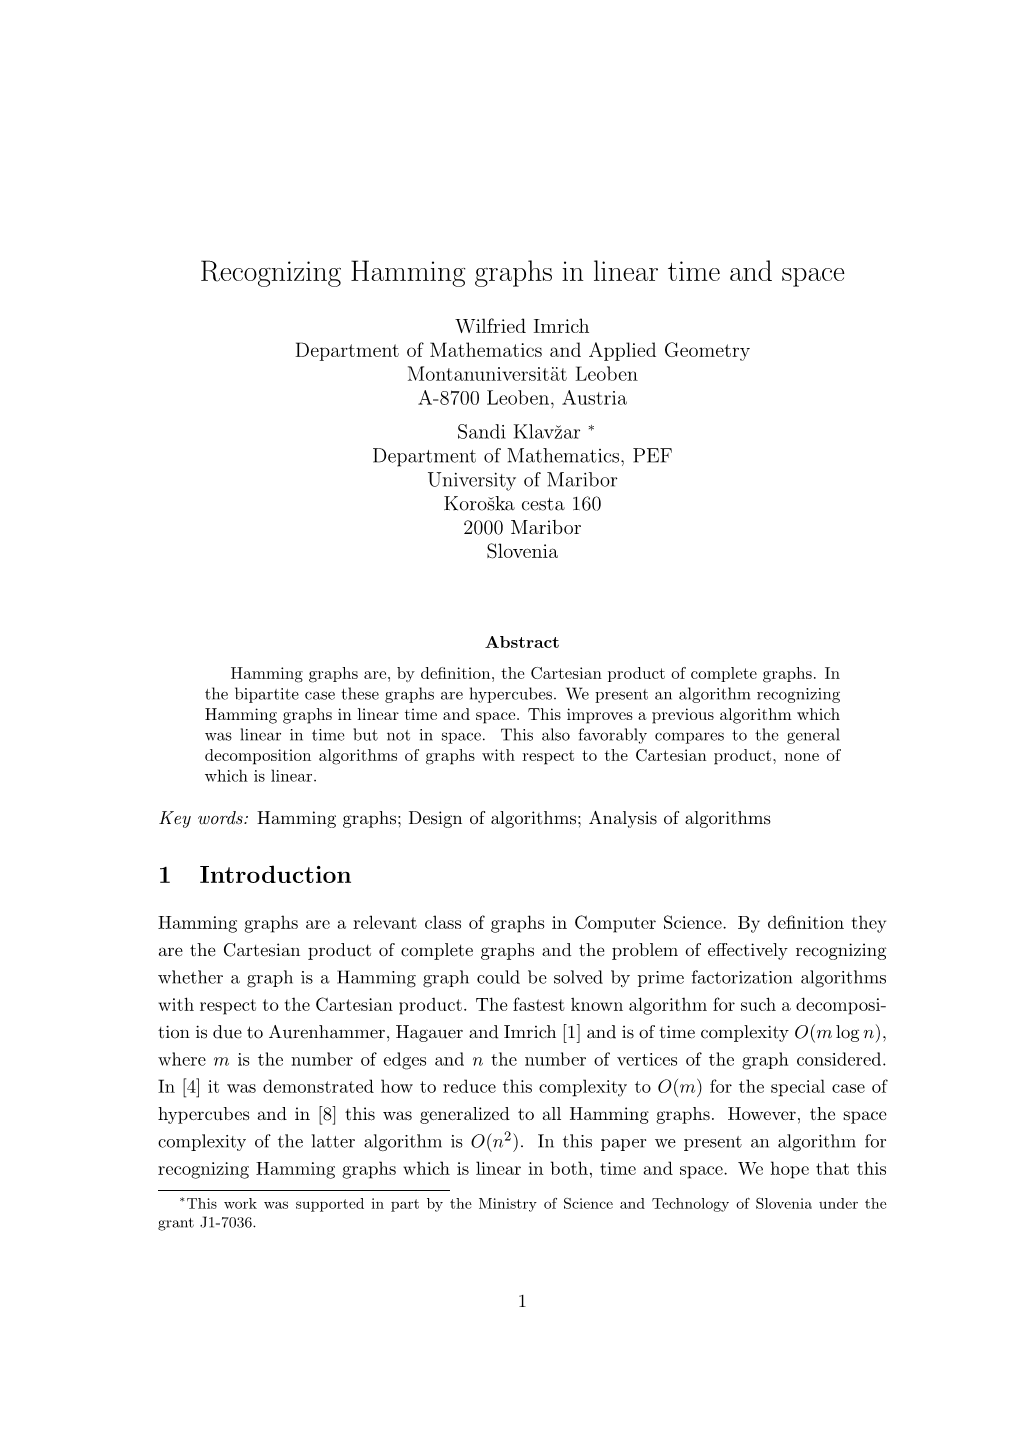 Recognizing Hamming Graphs in Linear Time and Space